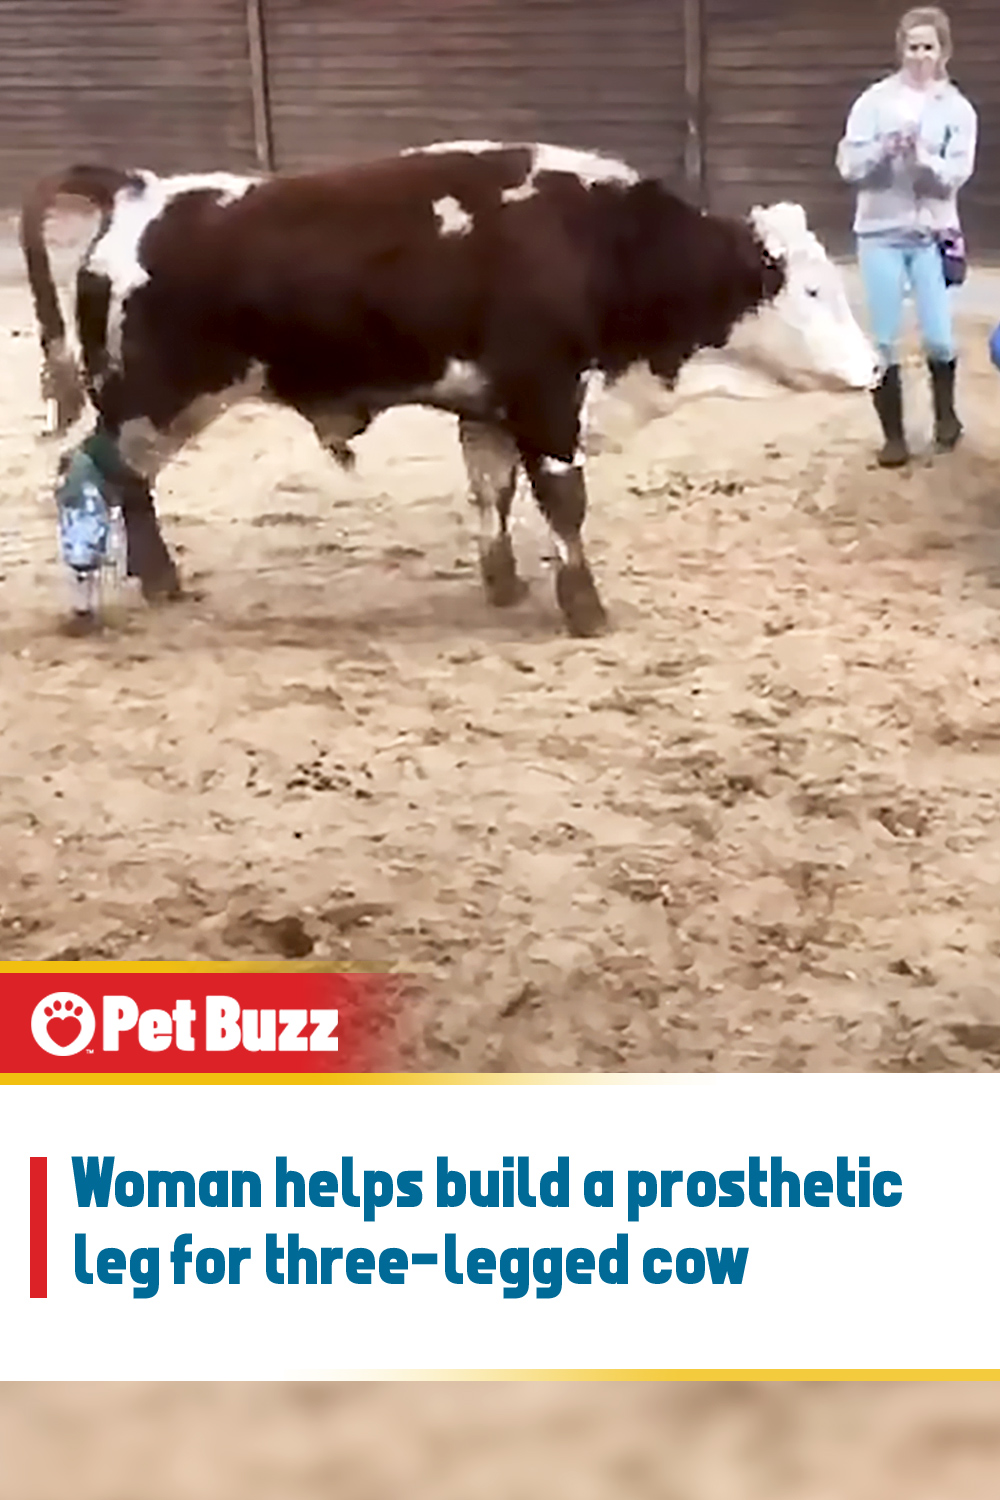 Woman helps build a prosthetic leg for three-legged cow